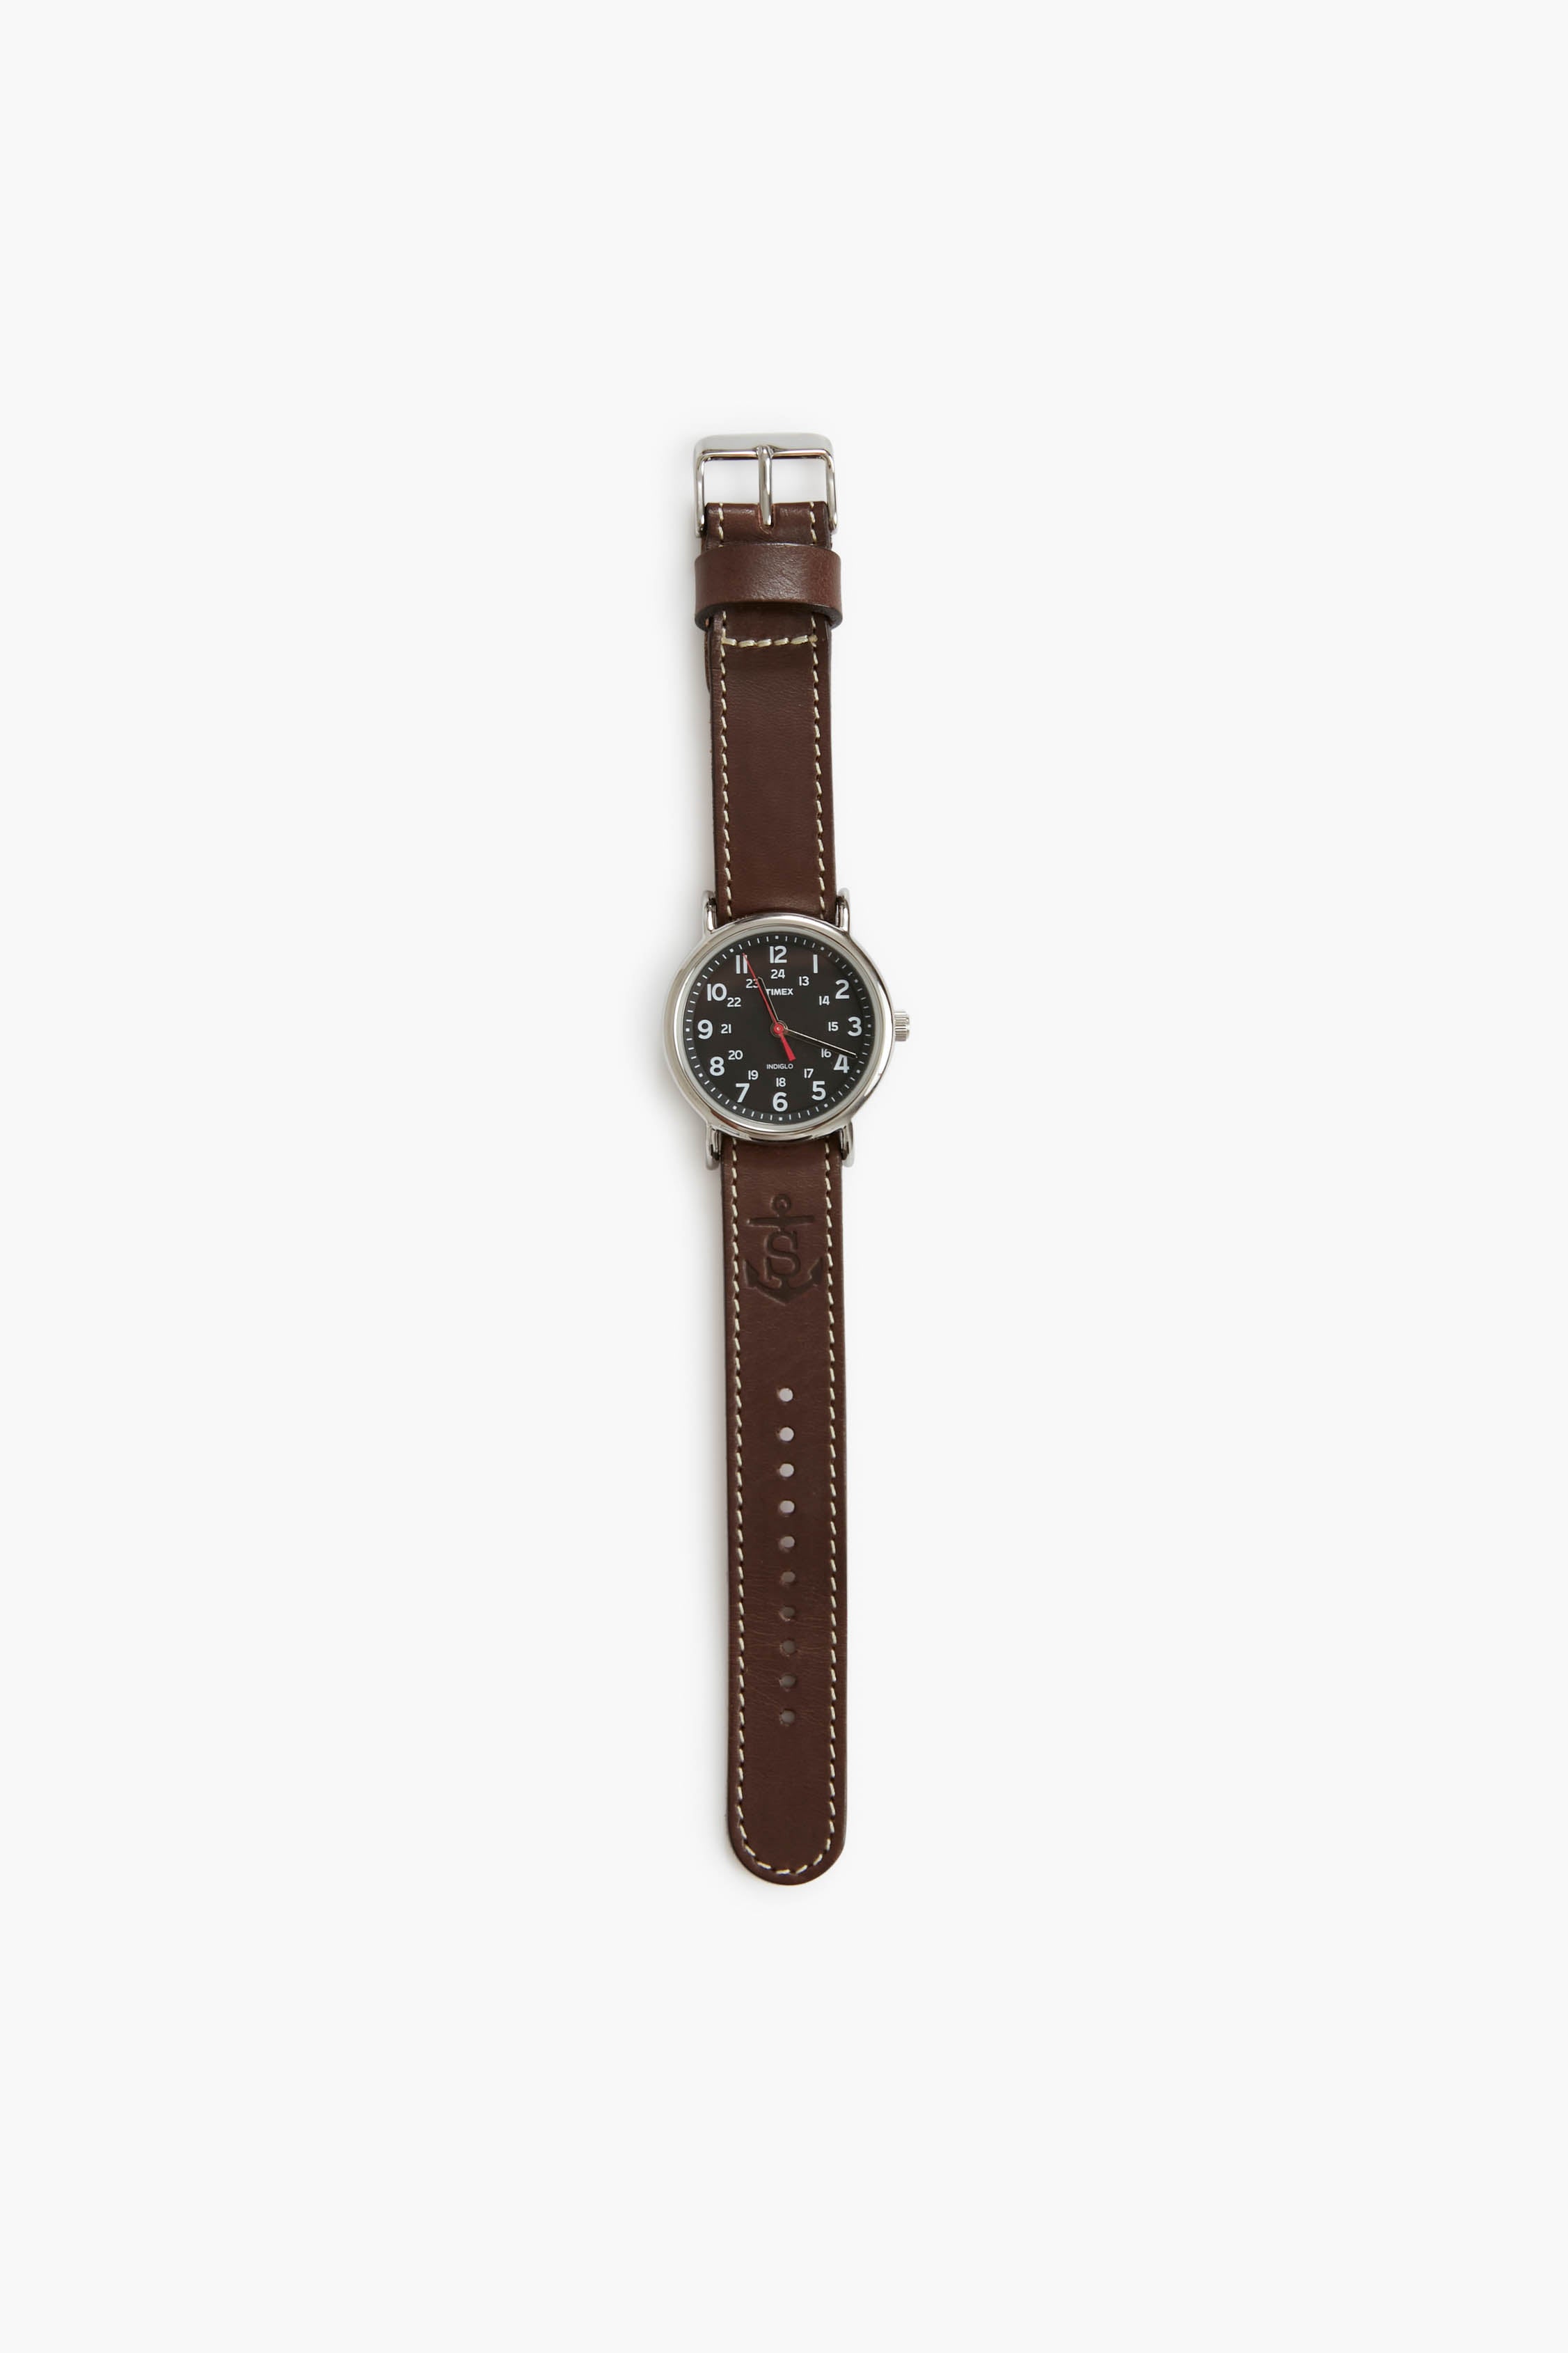 TIMEX T2N654 Weekender Analog Watch - For Men & Women in Delhi at best  price by Time Gallery - Justdial